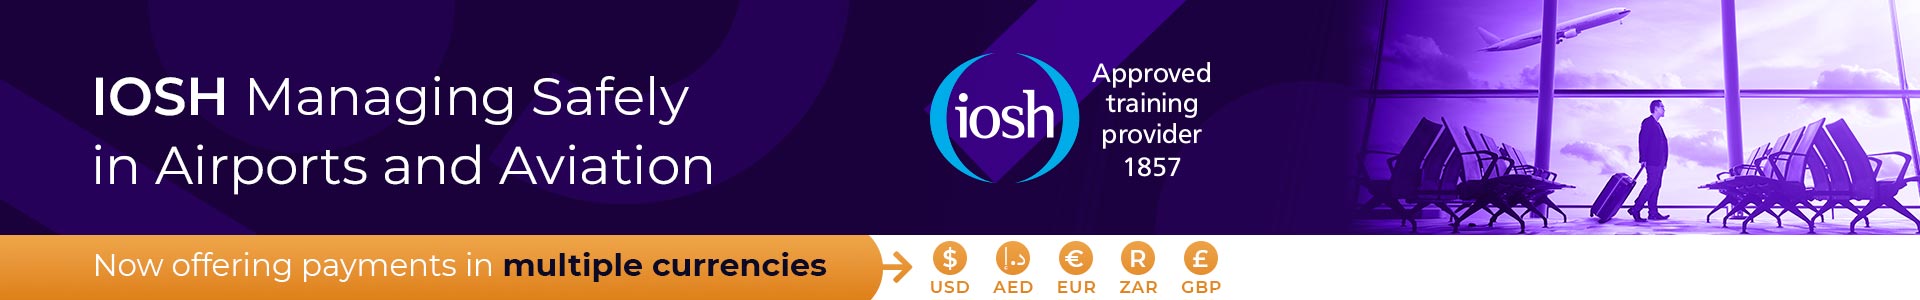 IOSH Managing Safely in Airports and Aviation